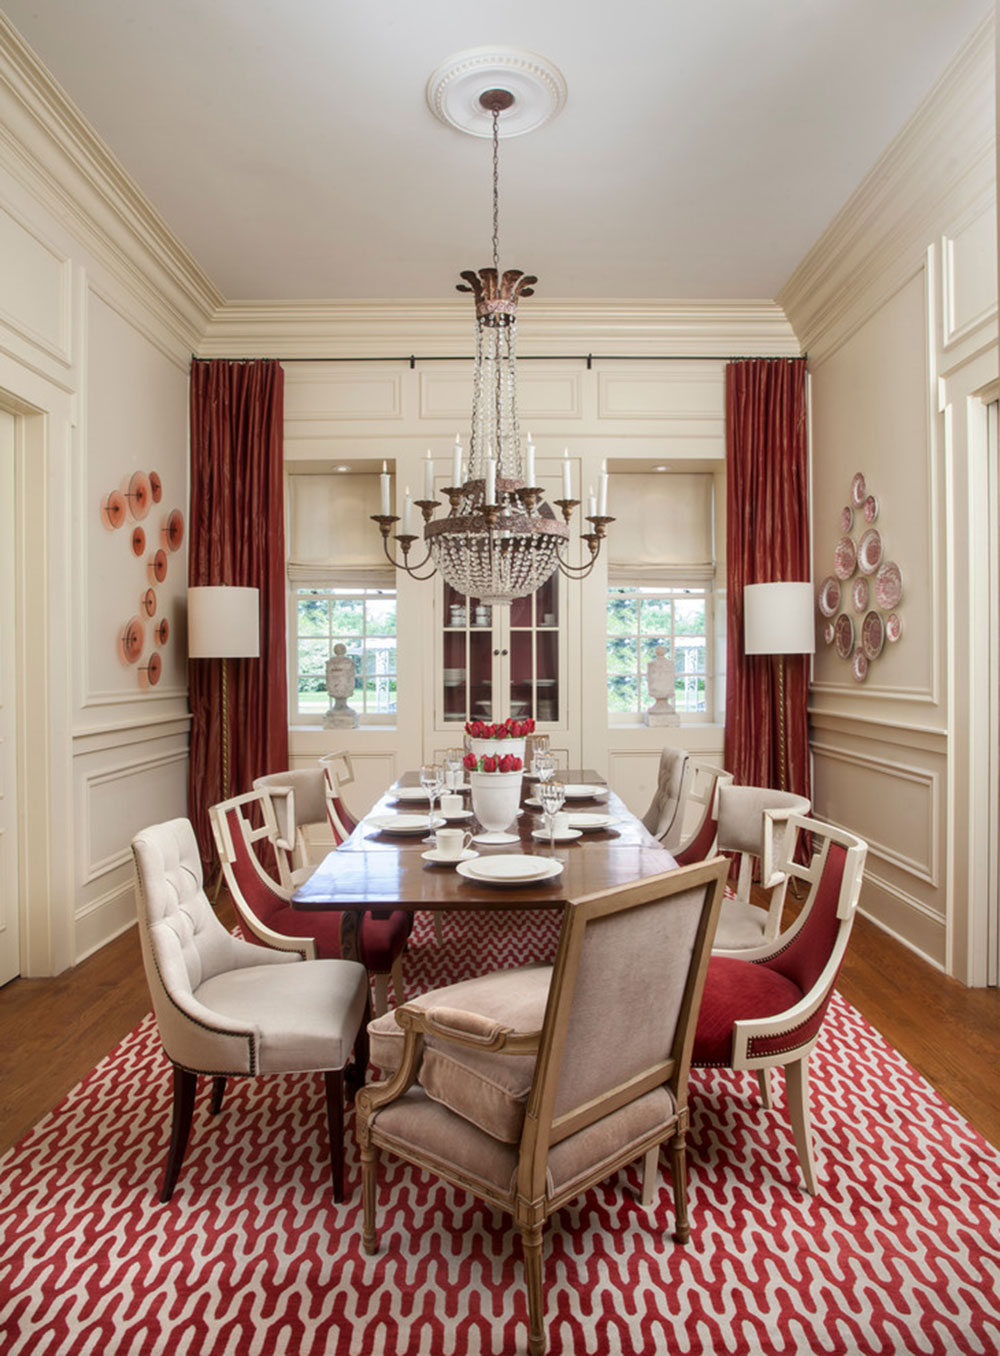 Chandelier For The Dining Room, How To Pick Out A Chandelier For Dining Room